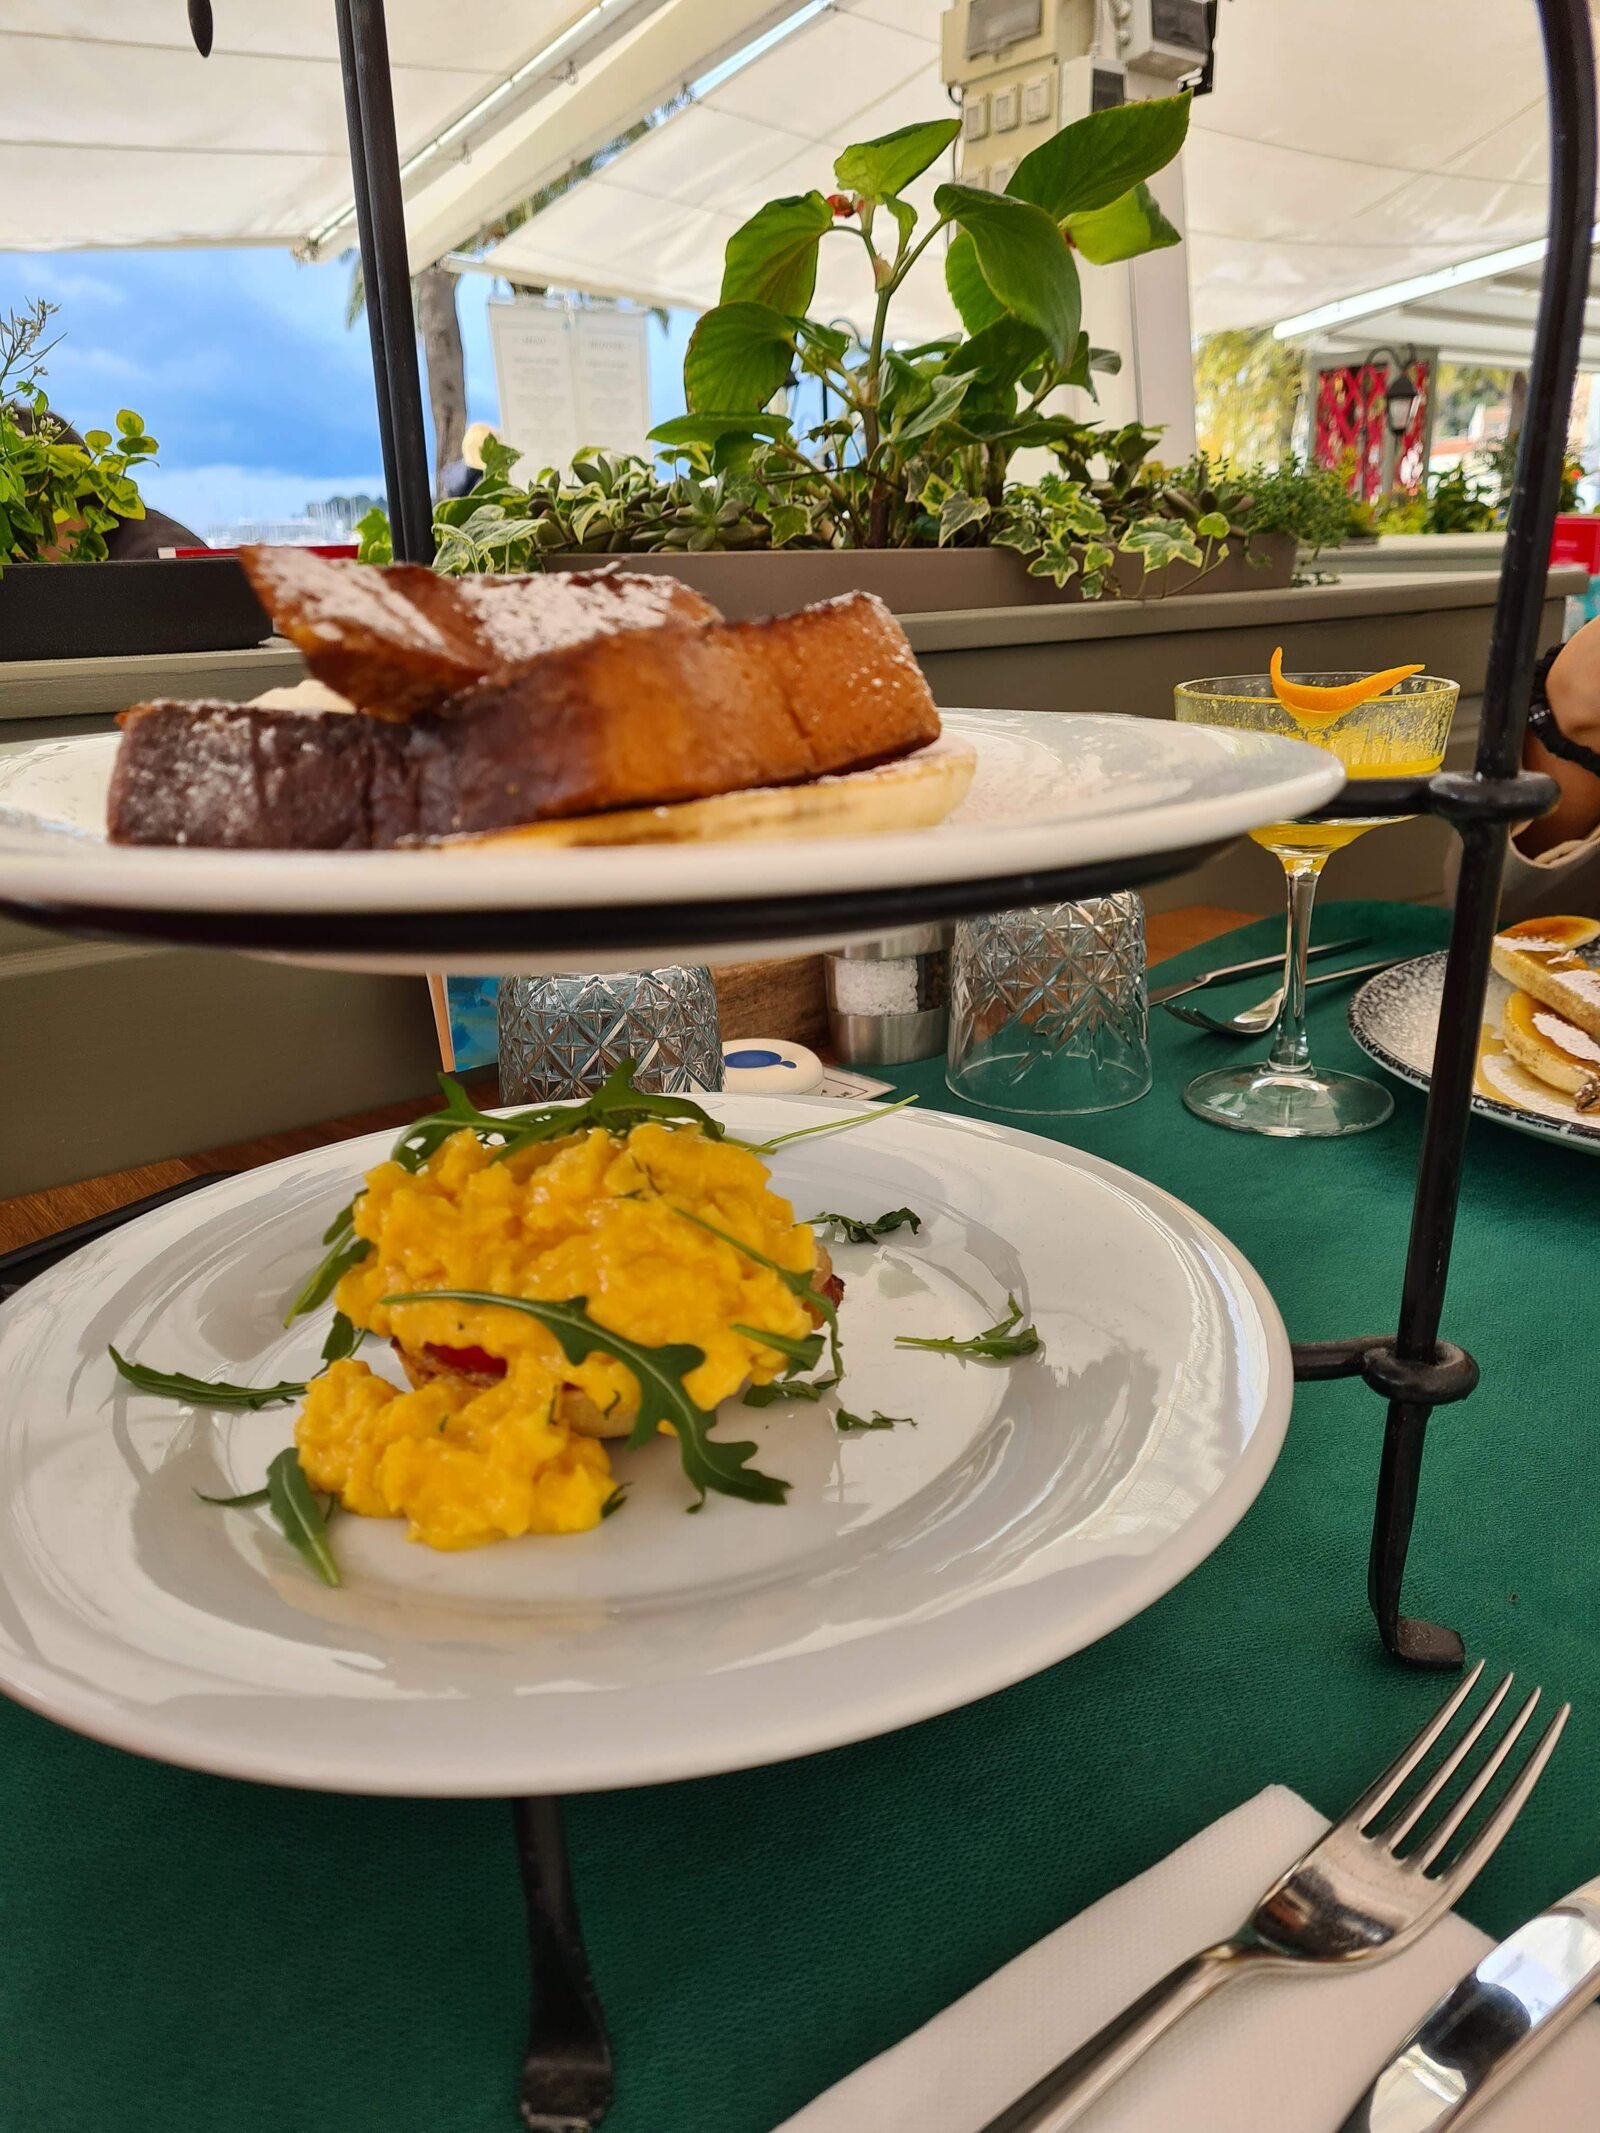 Two plates with brown French toast and a yellow egged dish stacked on a two tier fixture sitting on a table outside